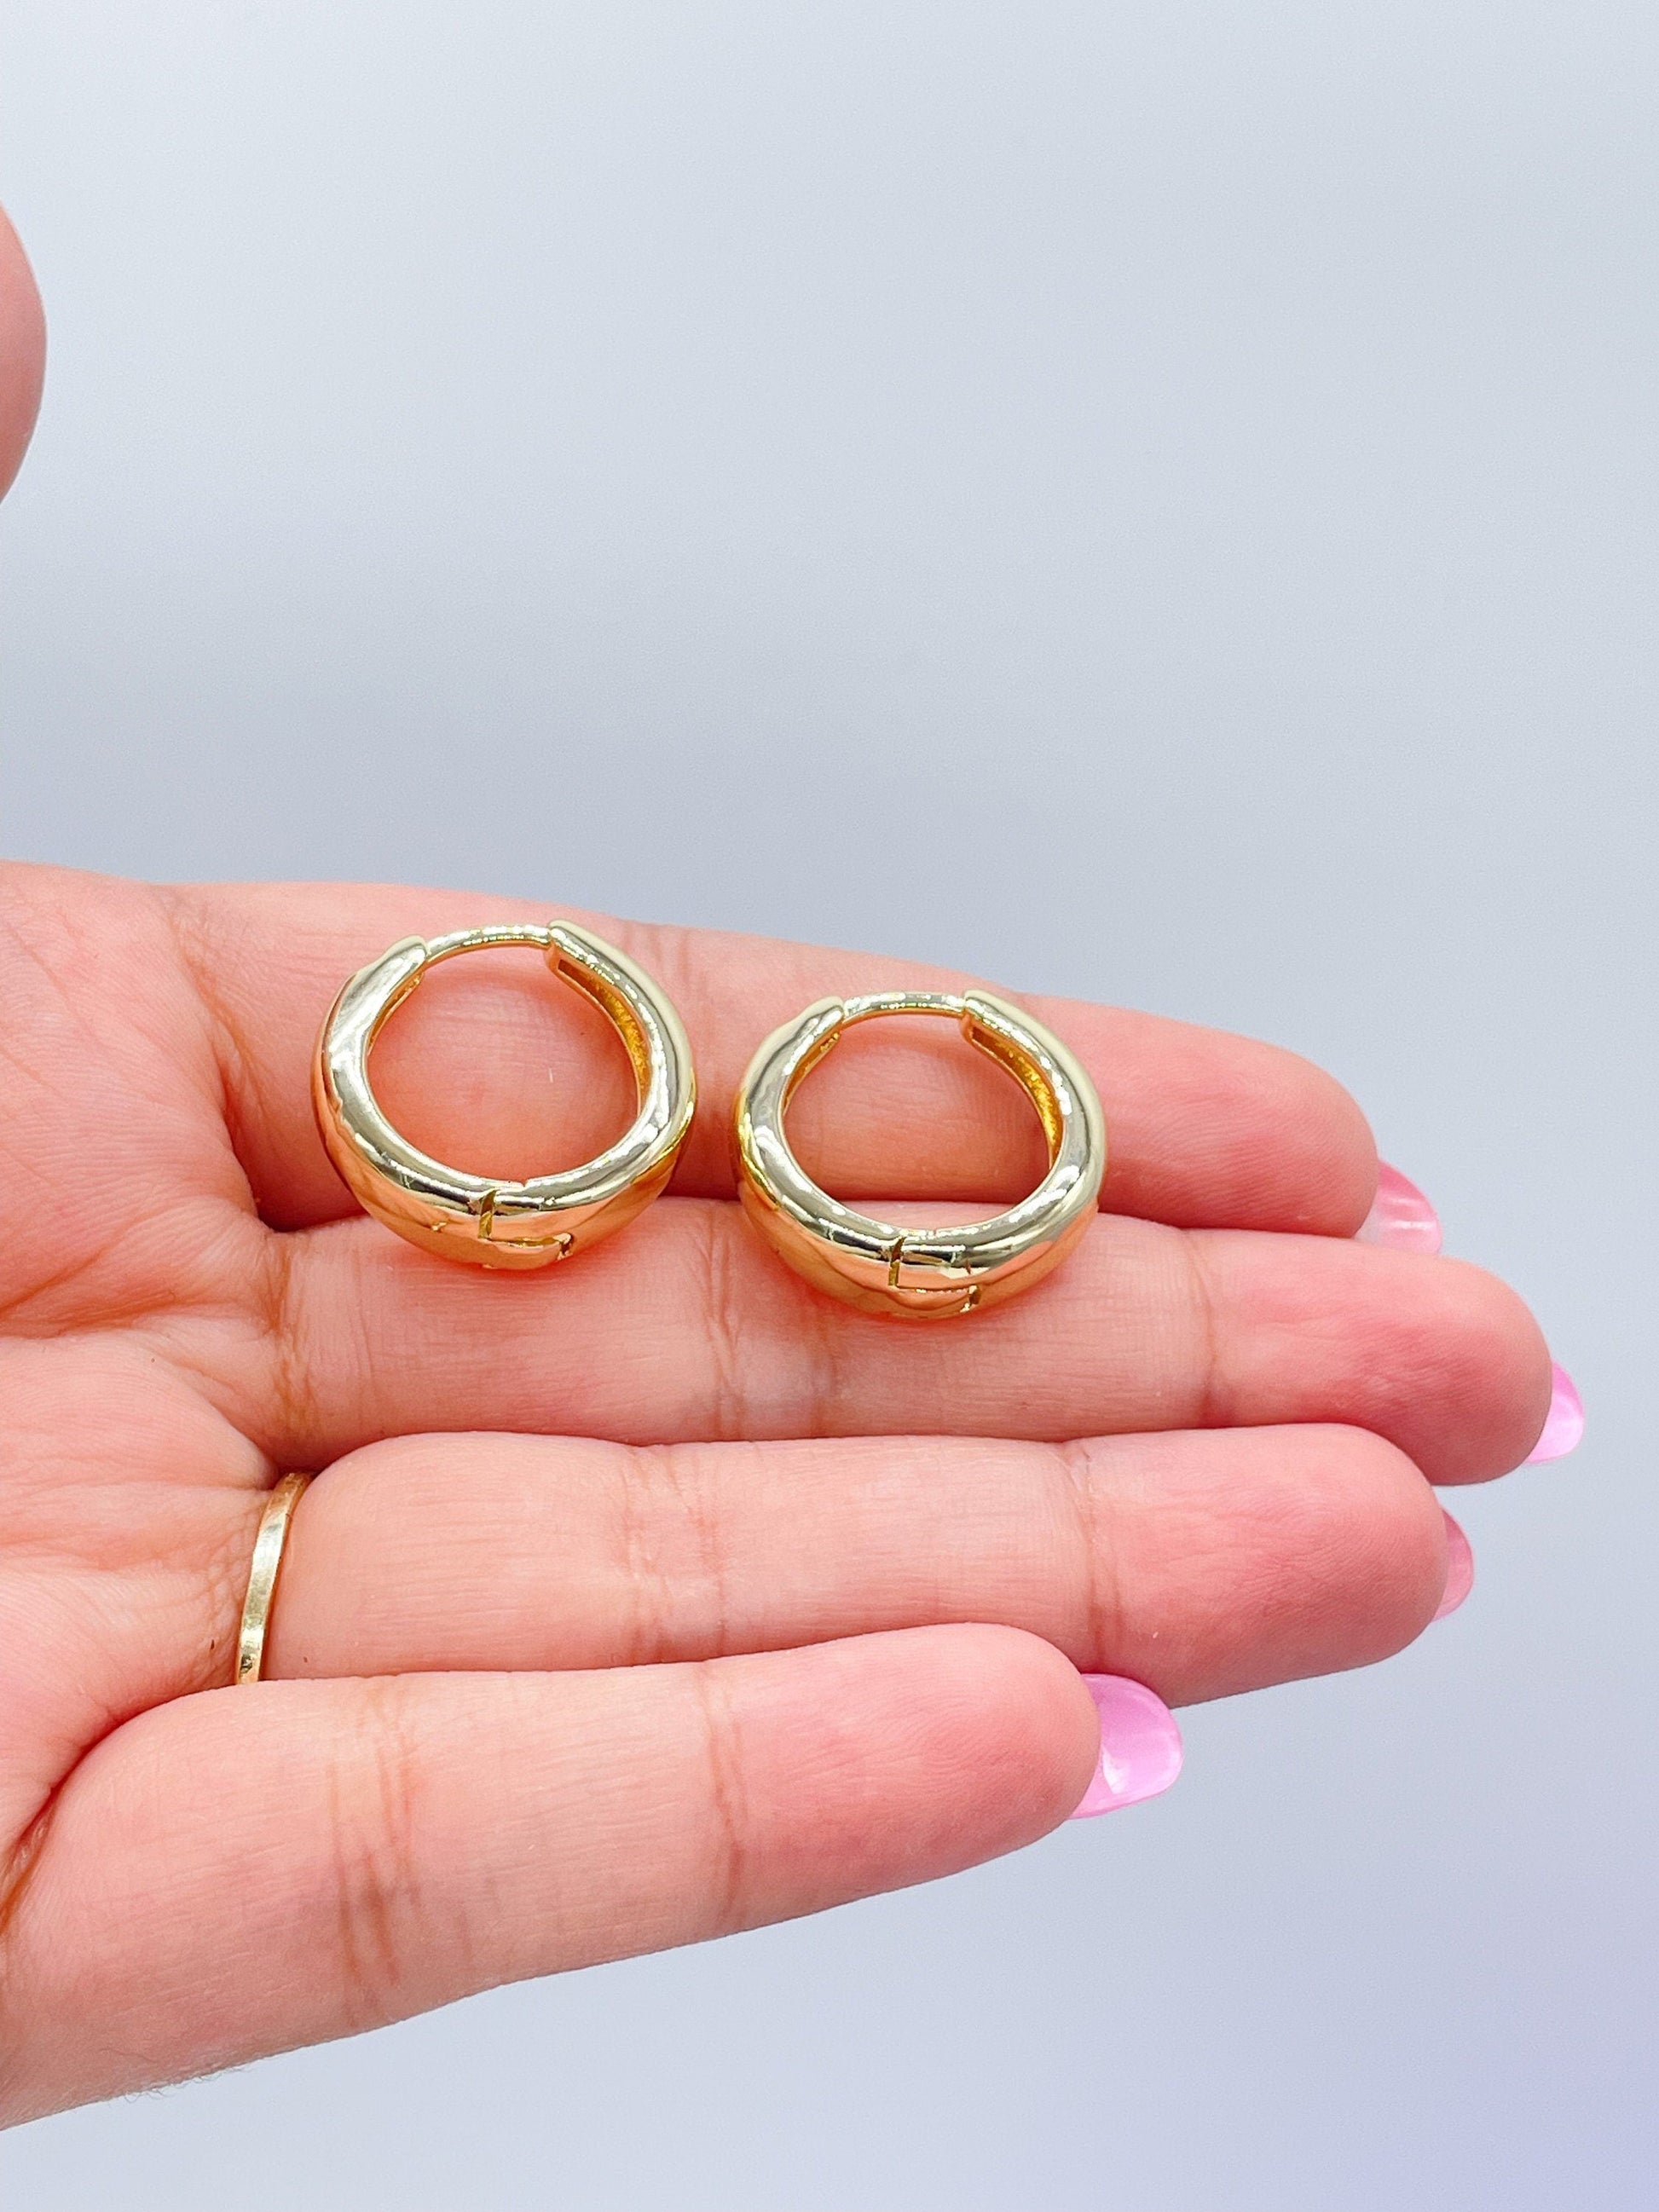 18k Gold Filled Oval Shape Smooth Plain Huggie Hoop Earring Available in 2 Sizes